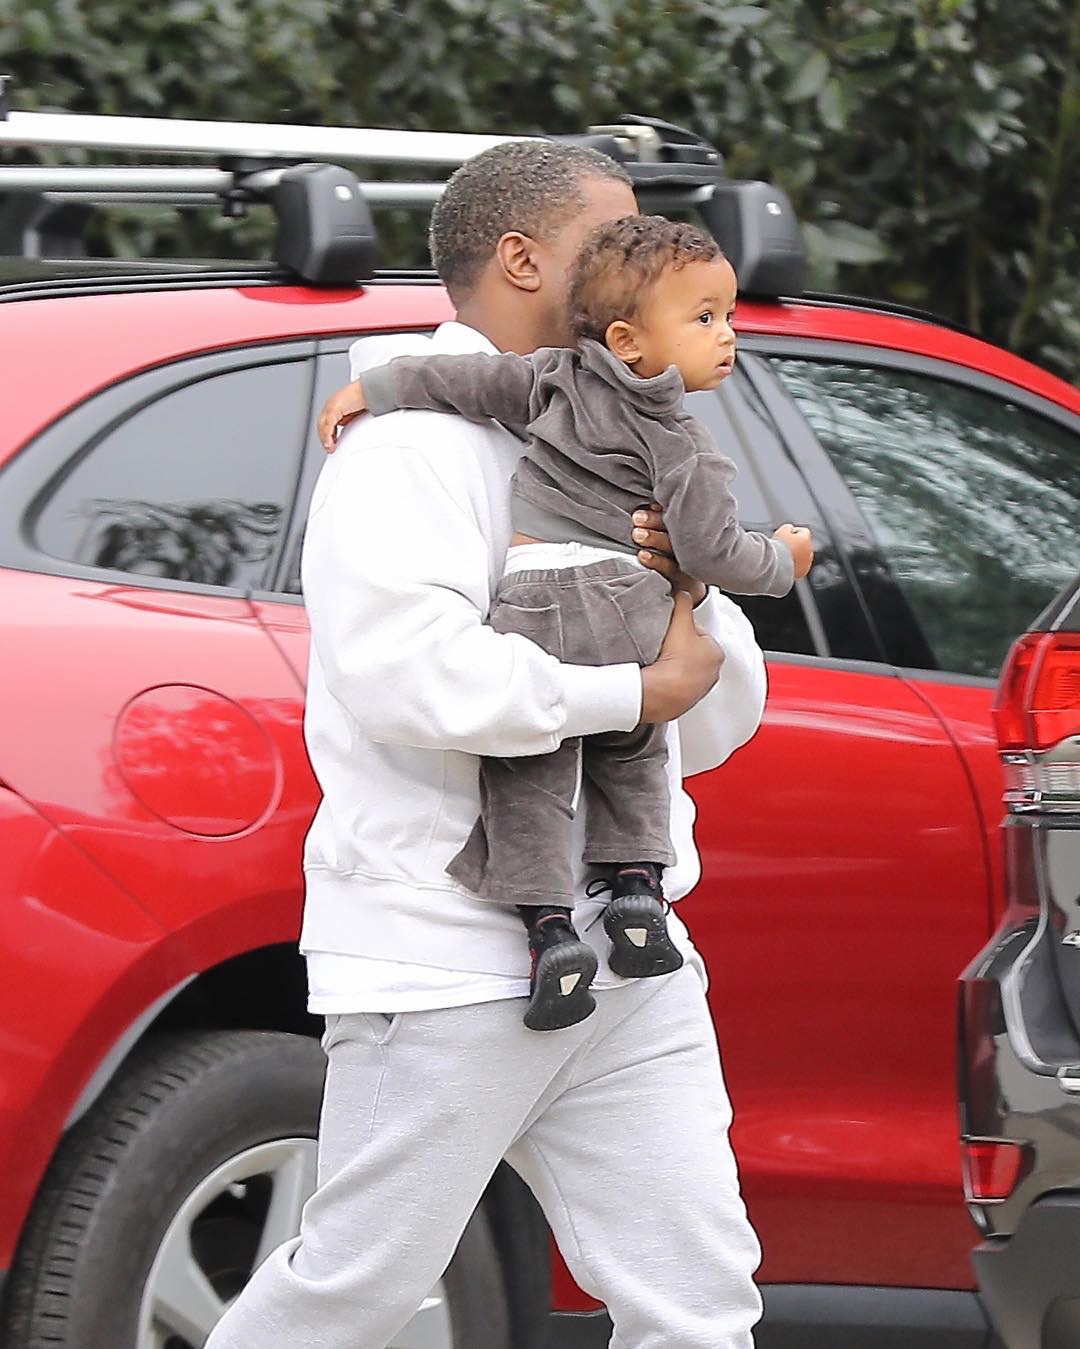 SPOTTED: Kanye West Wearing Champion Joggers and Yeezy Season